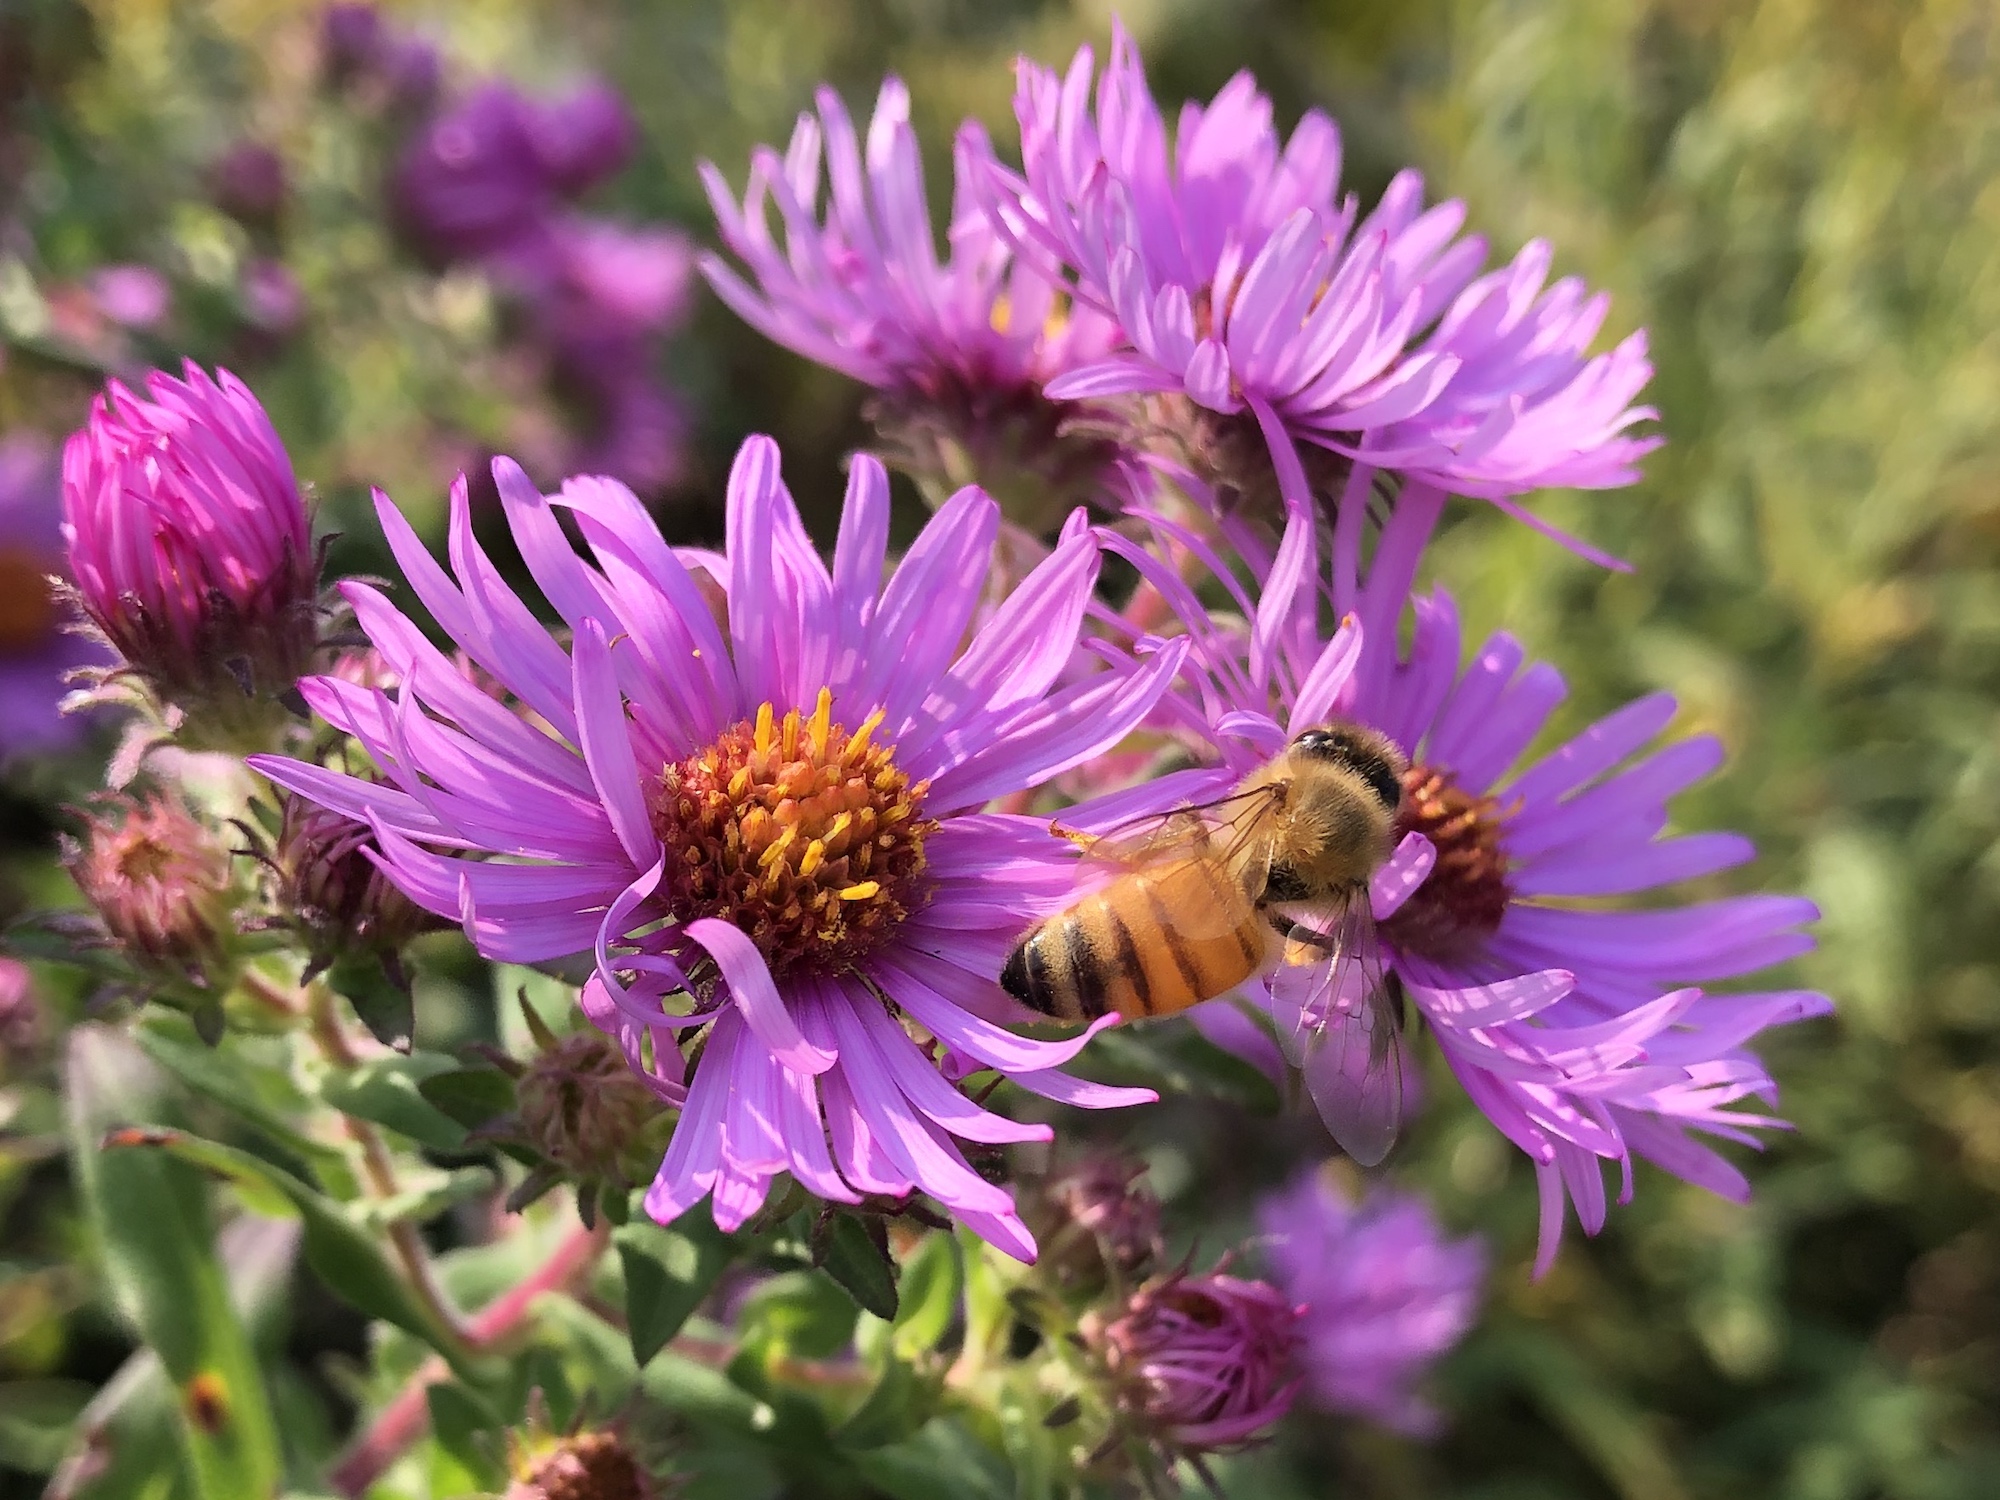 Bees on Aster on September 22, 2020.